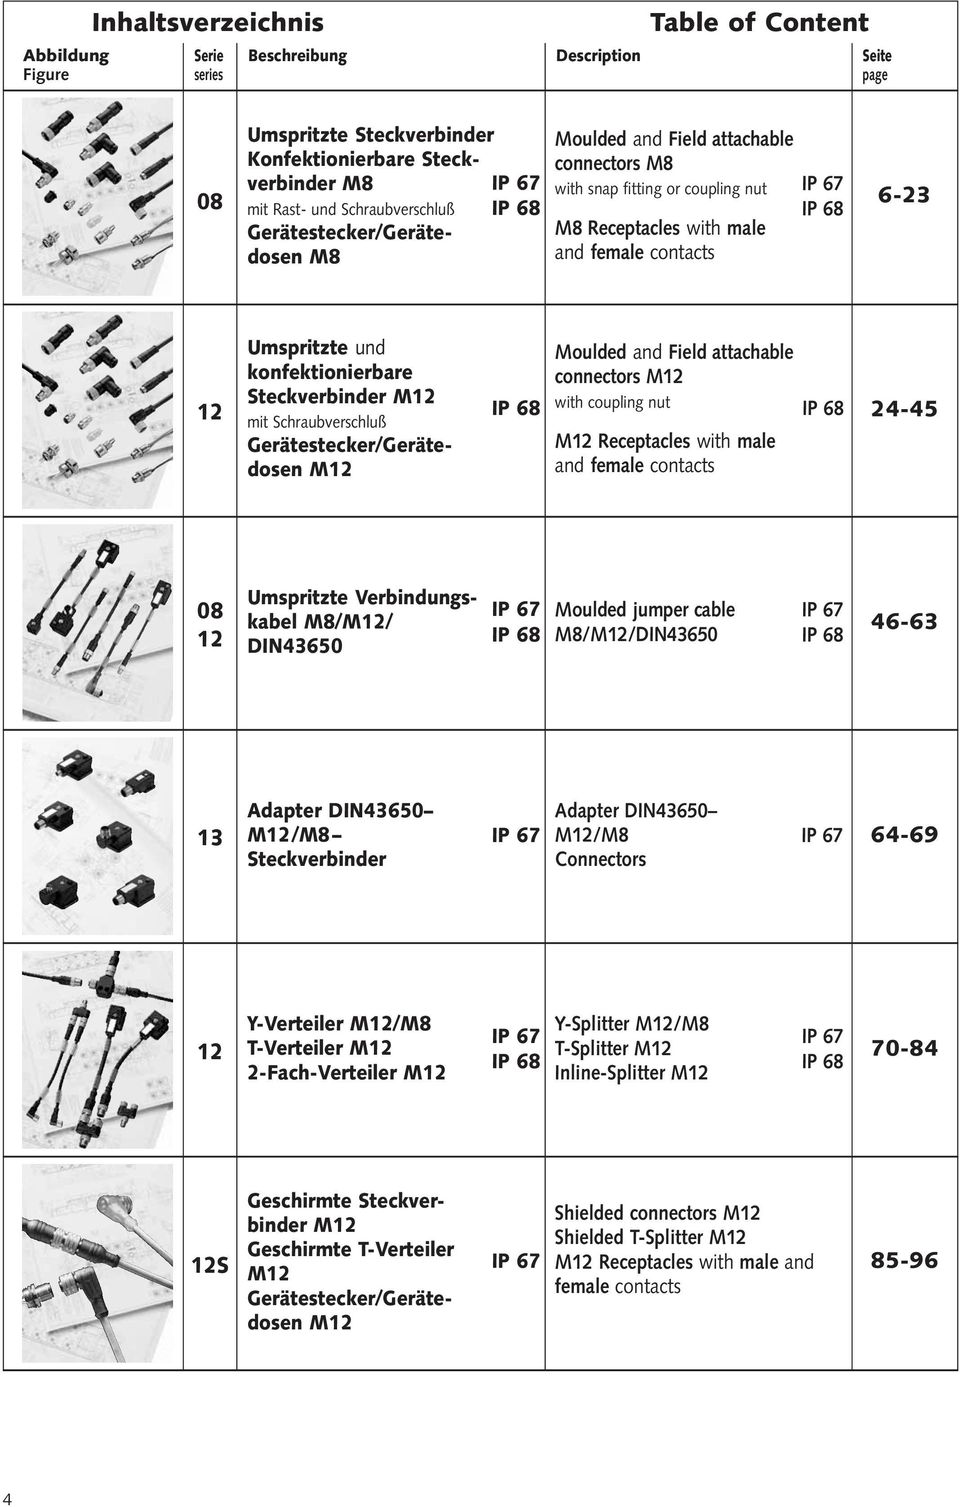 Gerätestecker/Gerätedosen M1 Moulded and Field attachable connectors M1 with coupling nut M1 Receptacles with male and female contacts - 08 1 Umspritzte Verbindungskabel M8/M1/ DIN60 Moulded jumper